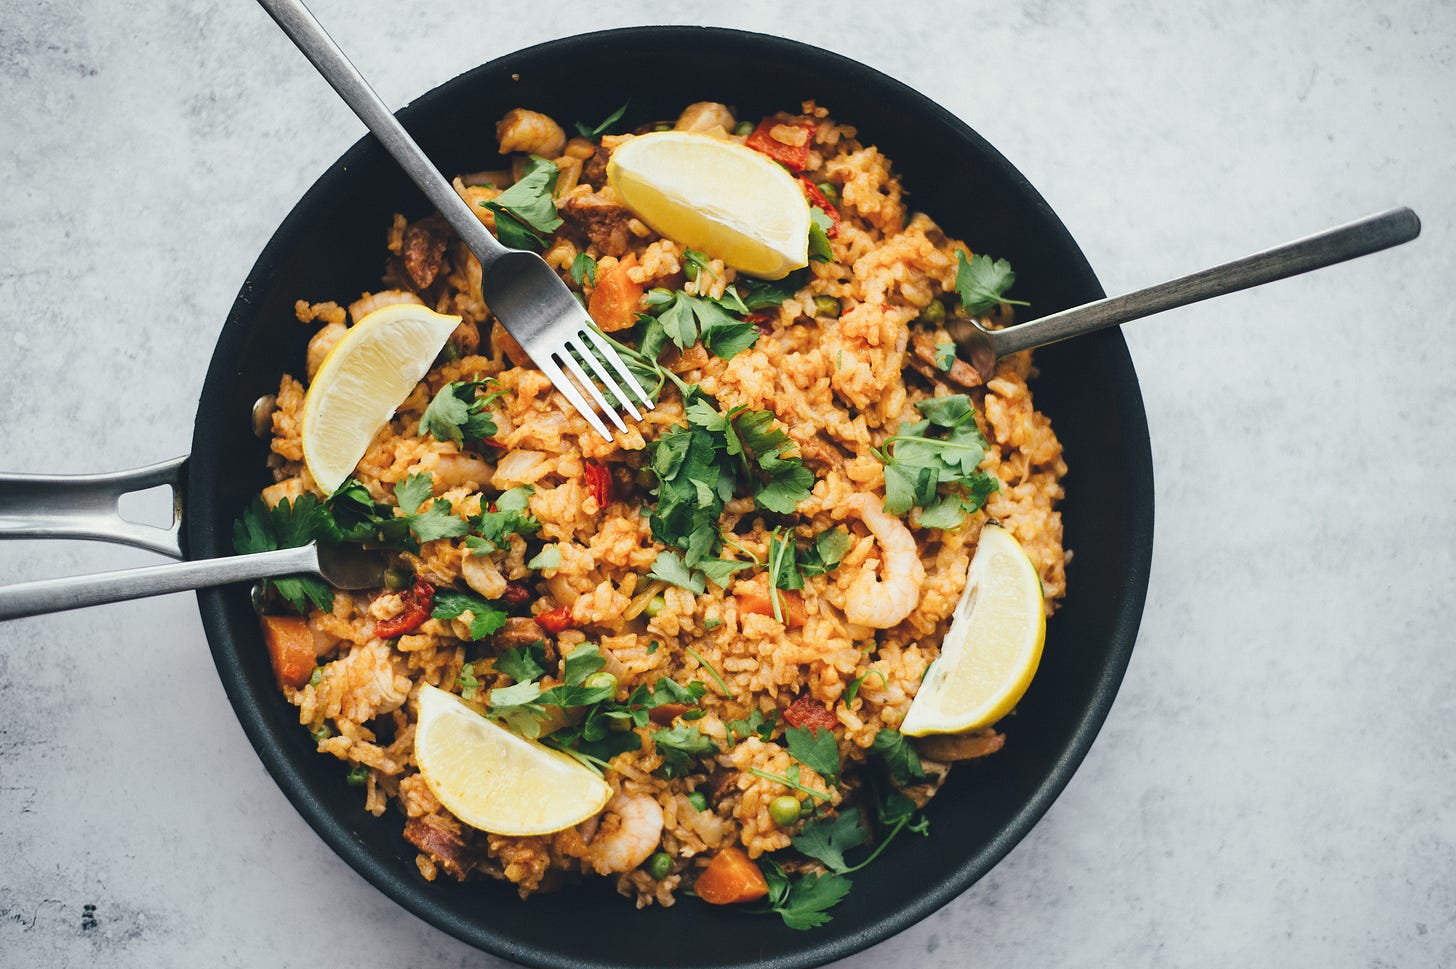 A bowl of fried rice. Foodies can add a twist to fried rice using seafood, veggies, and even regionally-inspired spices. | How to cook fried rice with recipes | Mania Food